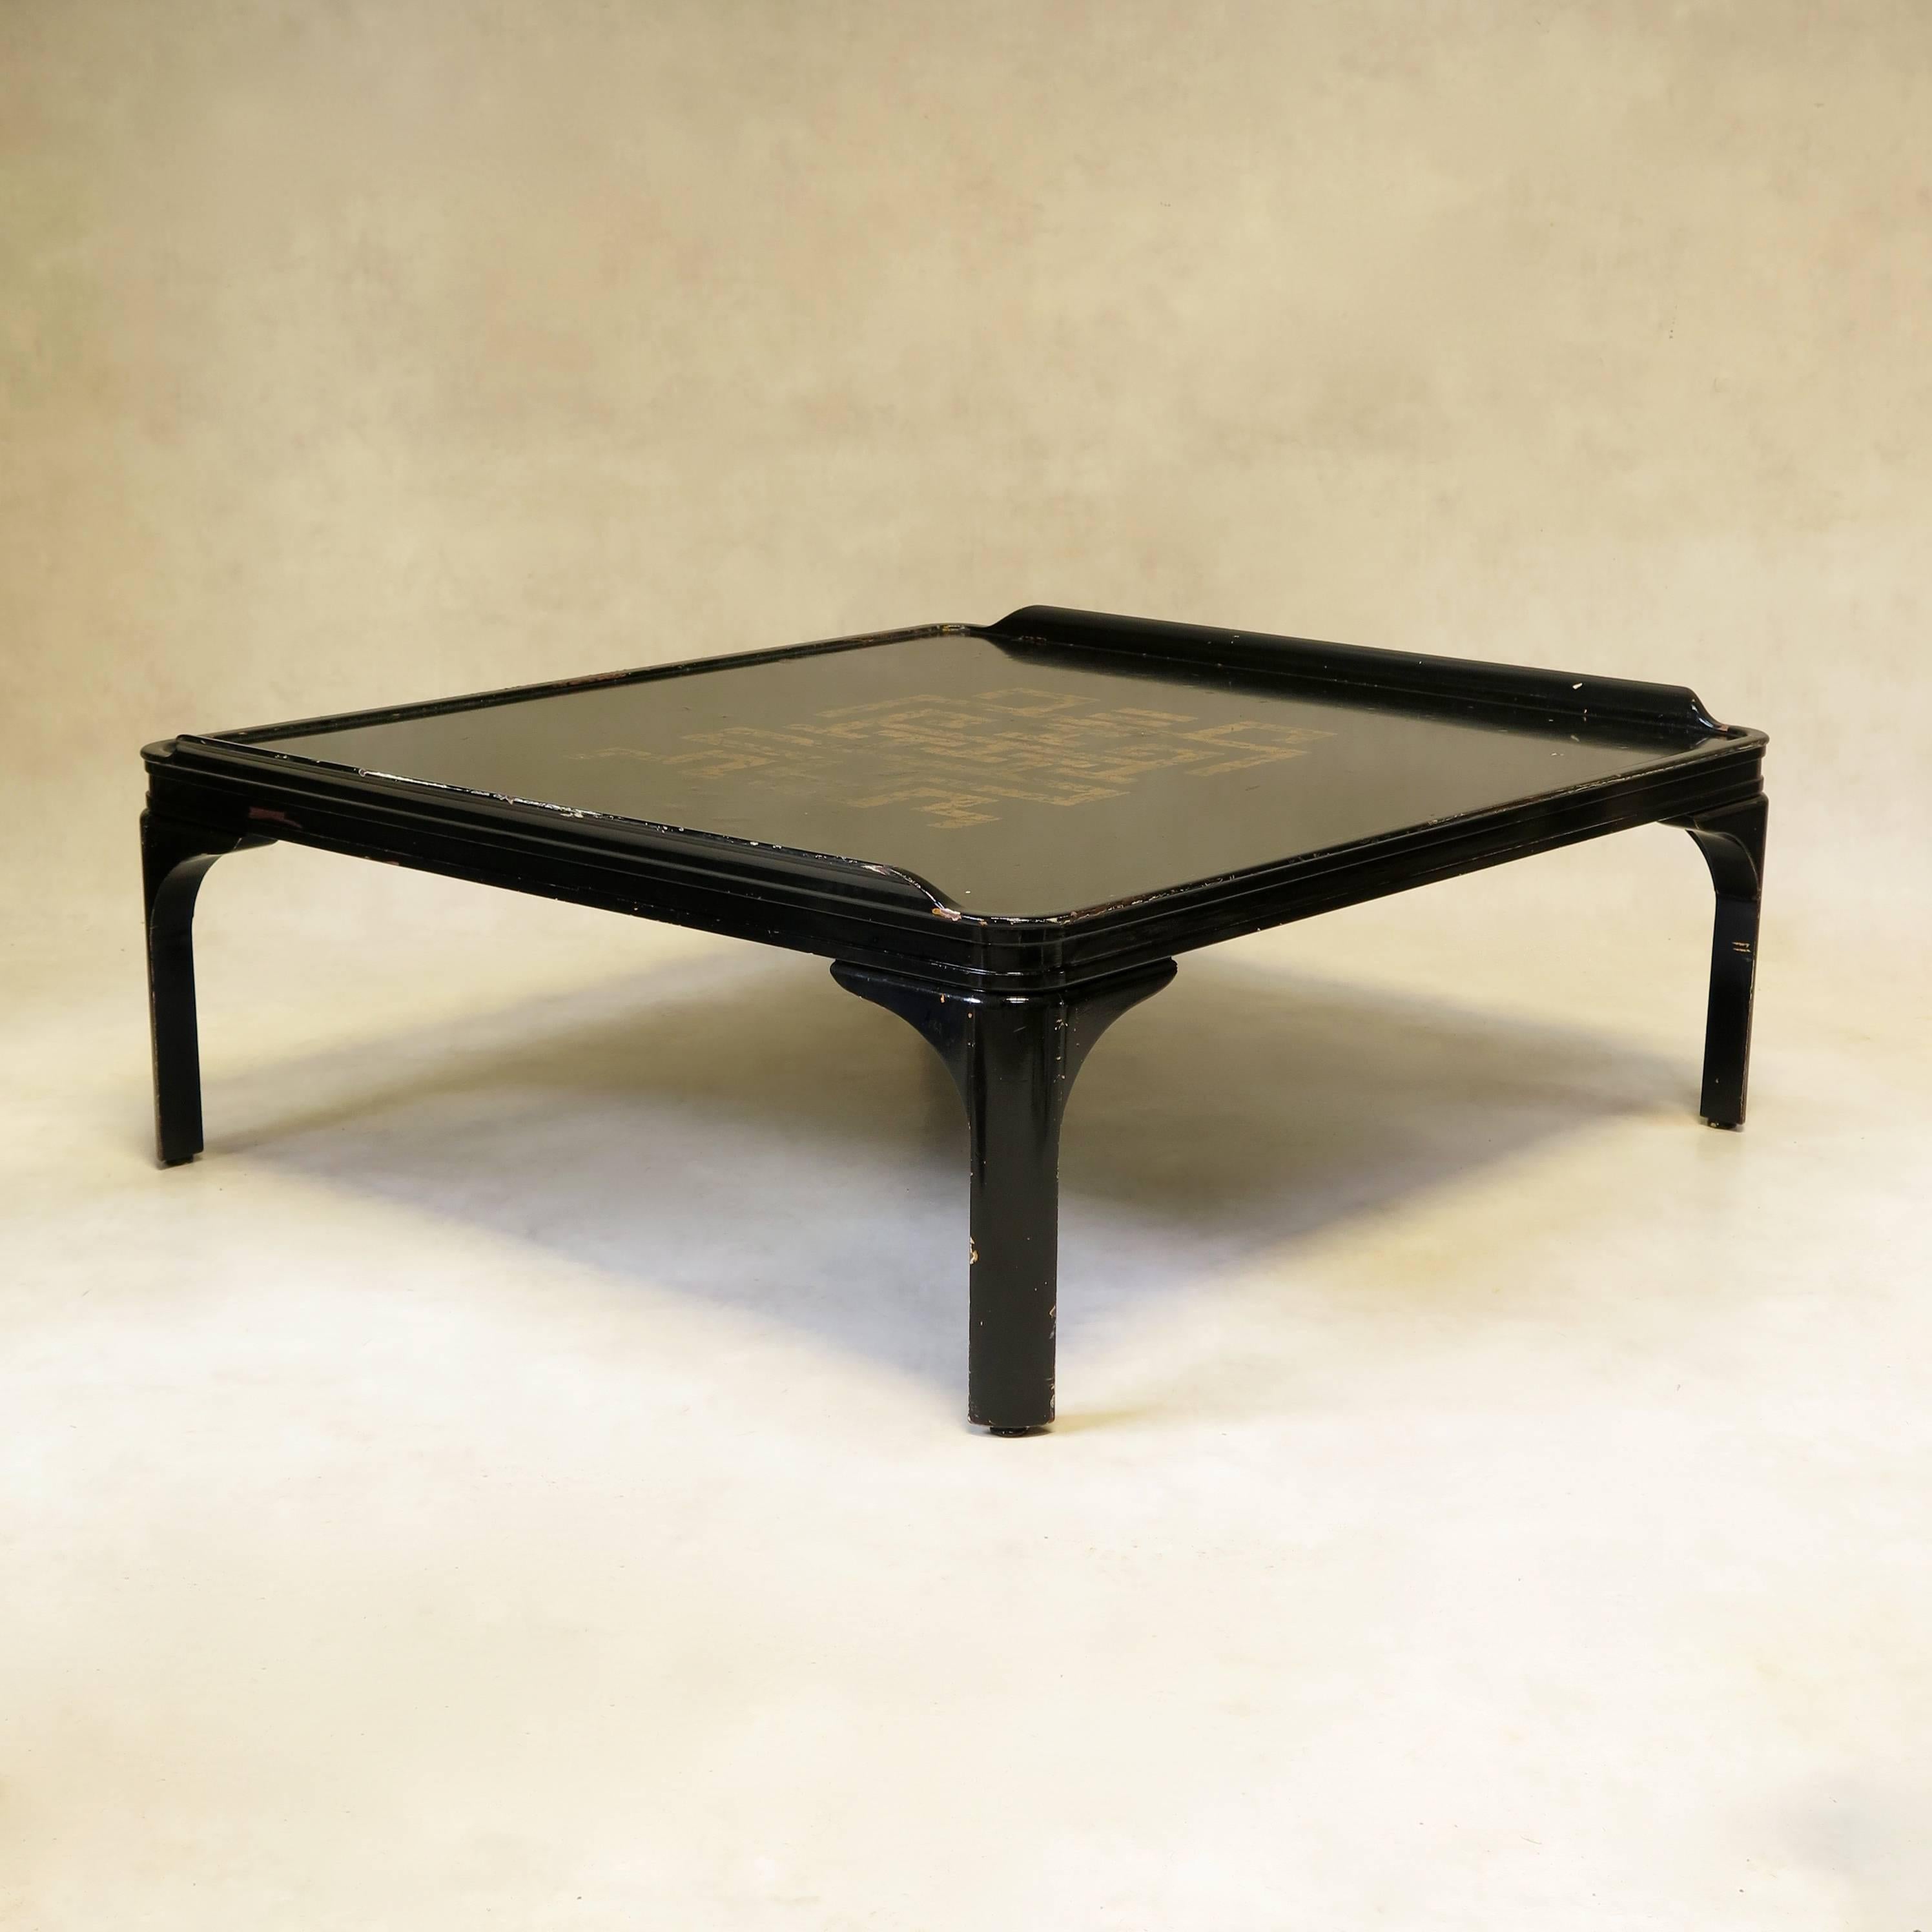 20th Century Large Square Chinese Art Deco Style Coffee Table, circa 1940s For Sale